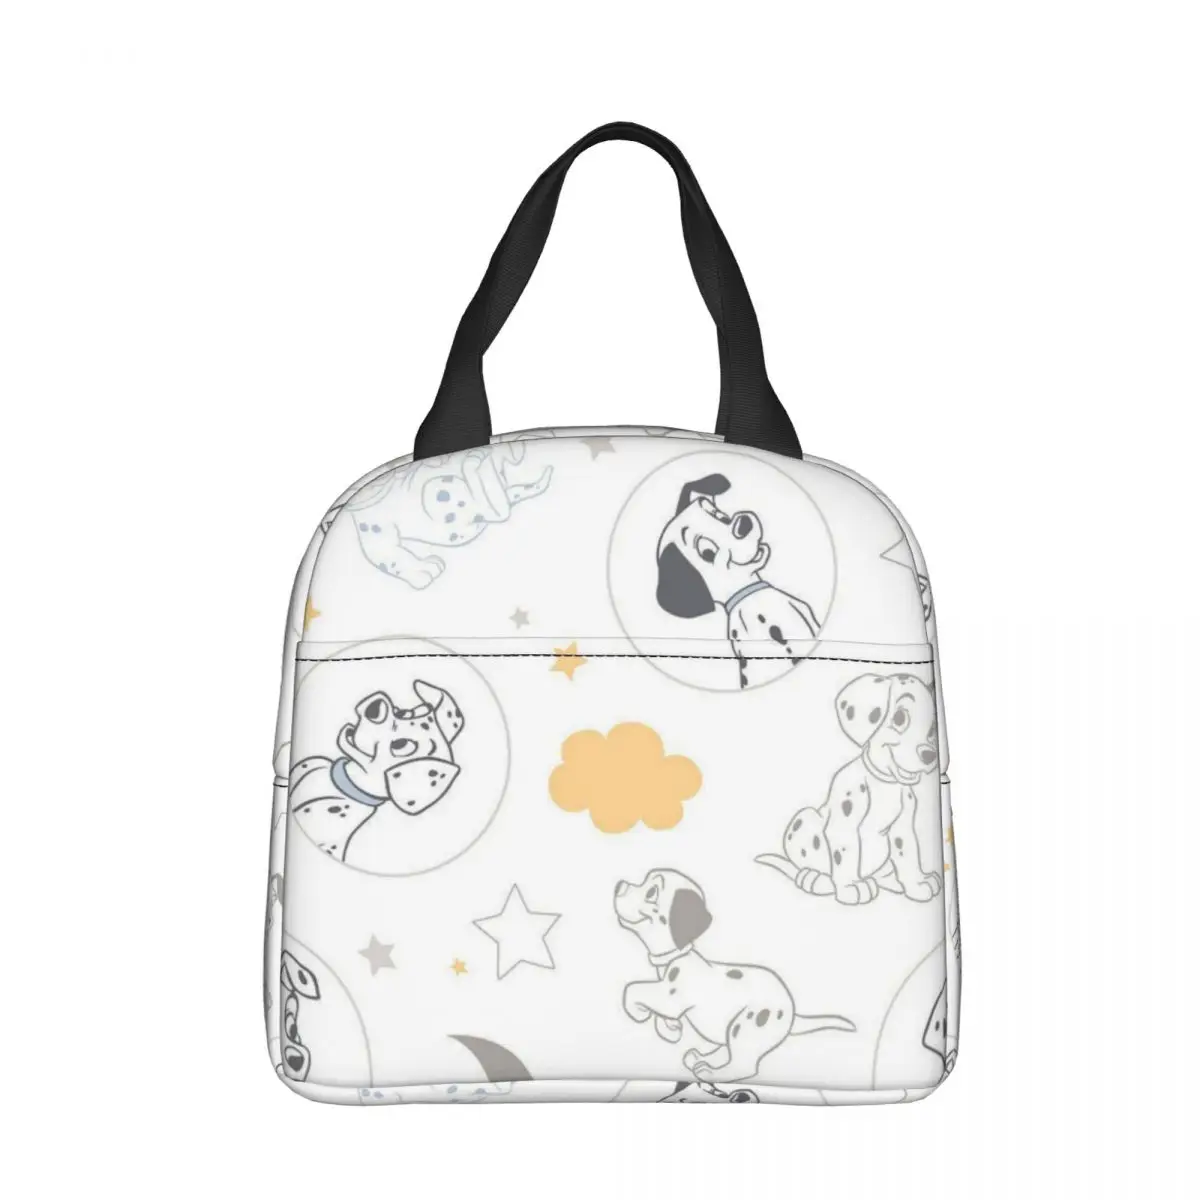 

Disney 101 Dalmatians Insulated Lunch Bag Portable Cartoon Pongo Meal Container Thermal Bag Lunch Box Tote Beach Food Handbags